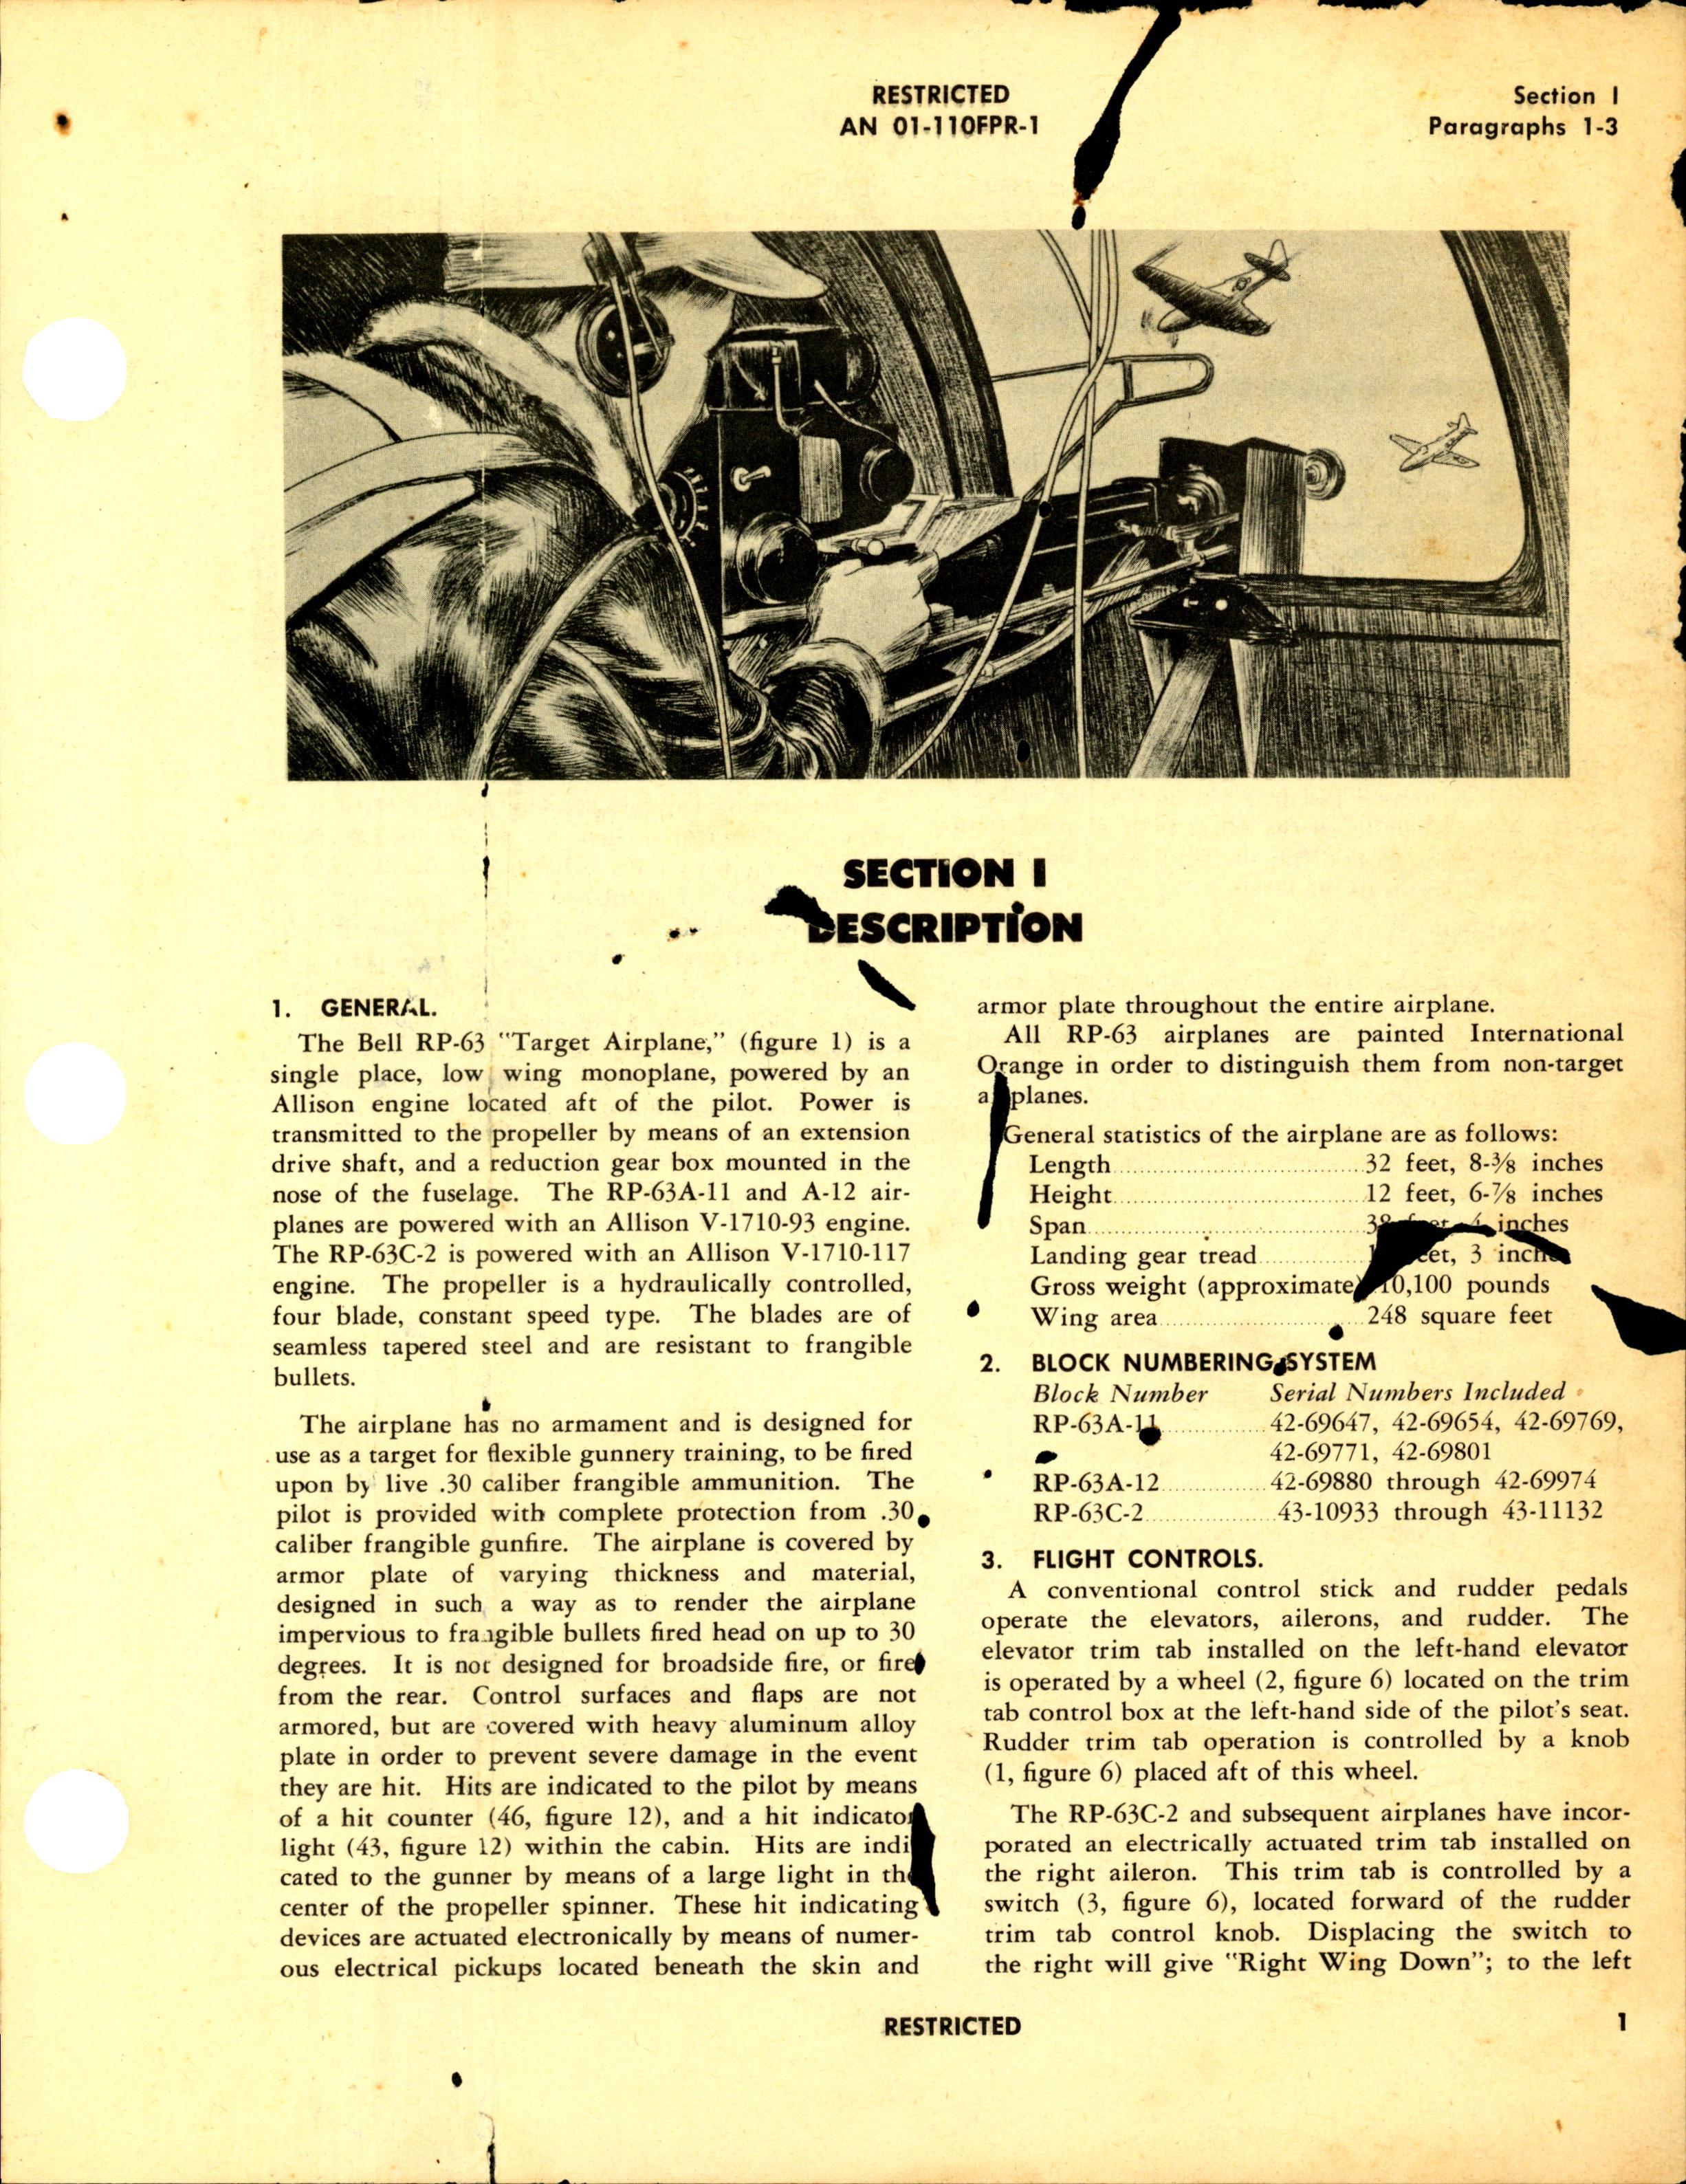 Sample page 5 from AirCorps Library document: Pilot's Handbook for RP-63A-11, -12, and RP-63C-2